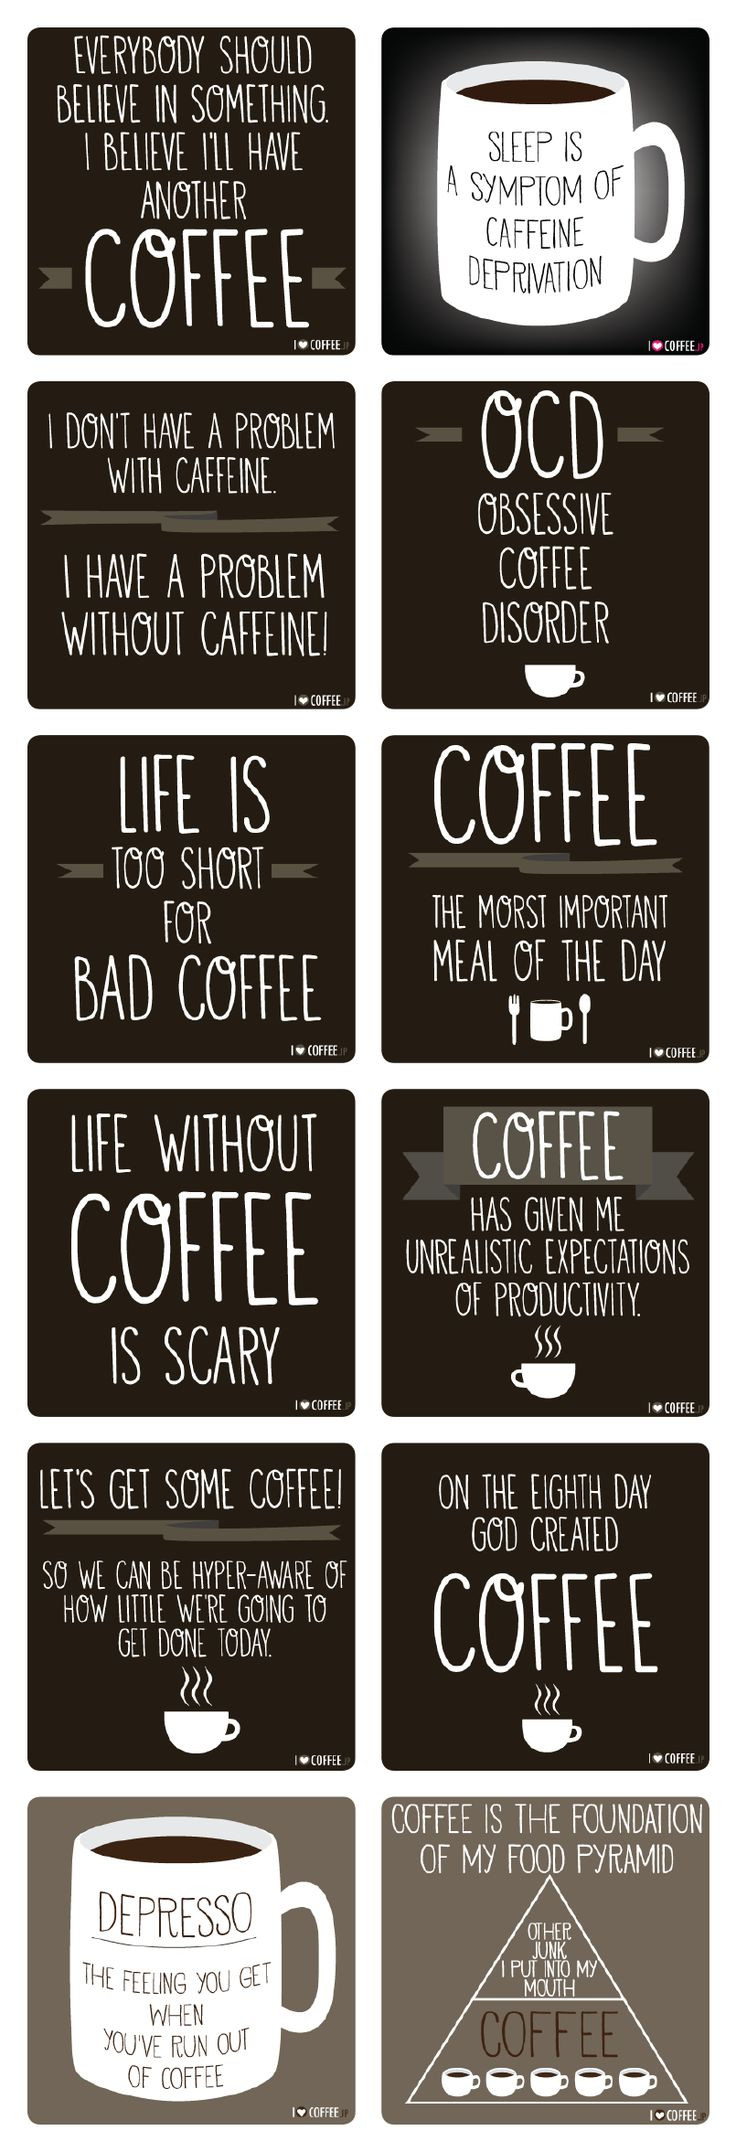 Funny Quotes About Coffee
 254 best Funny Coffee Quotes images on Pinterest